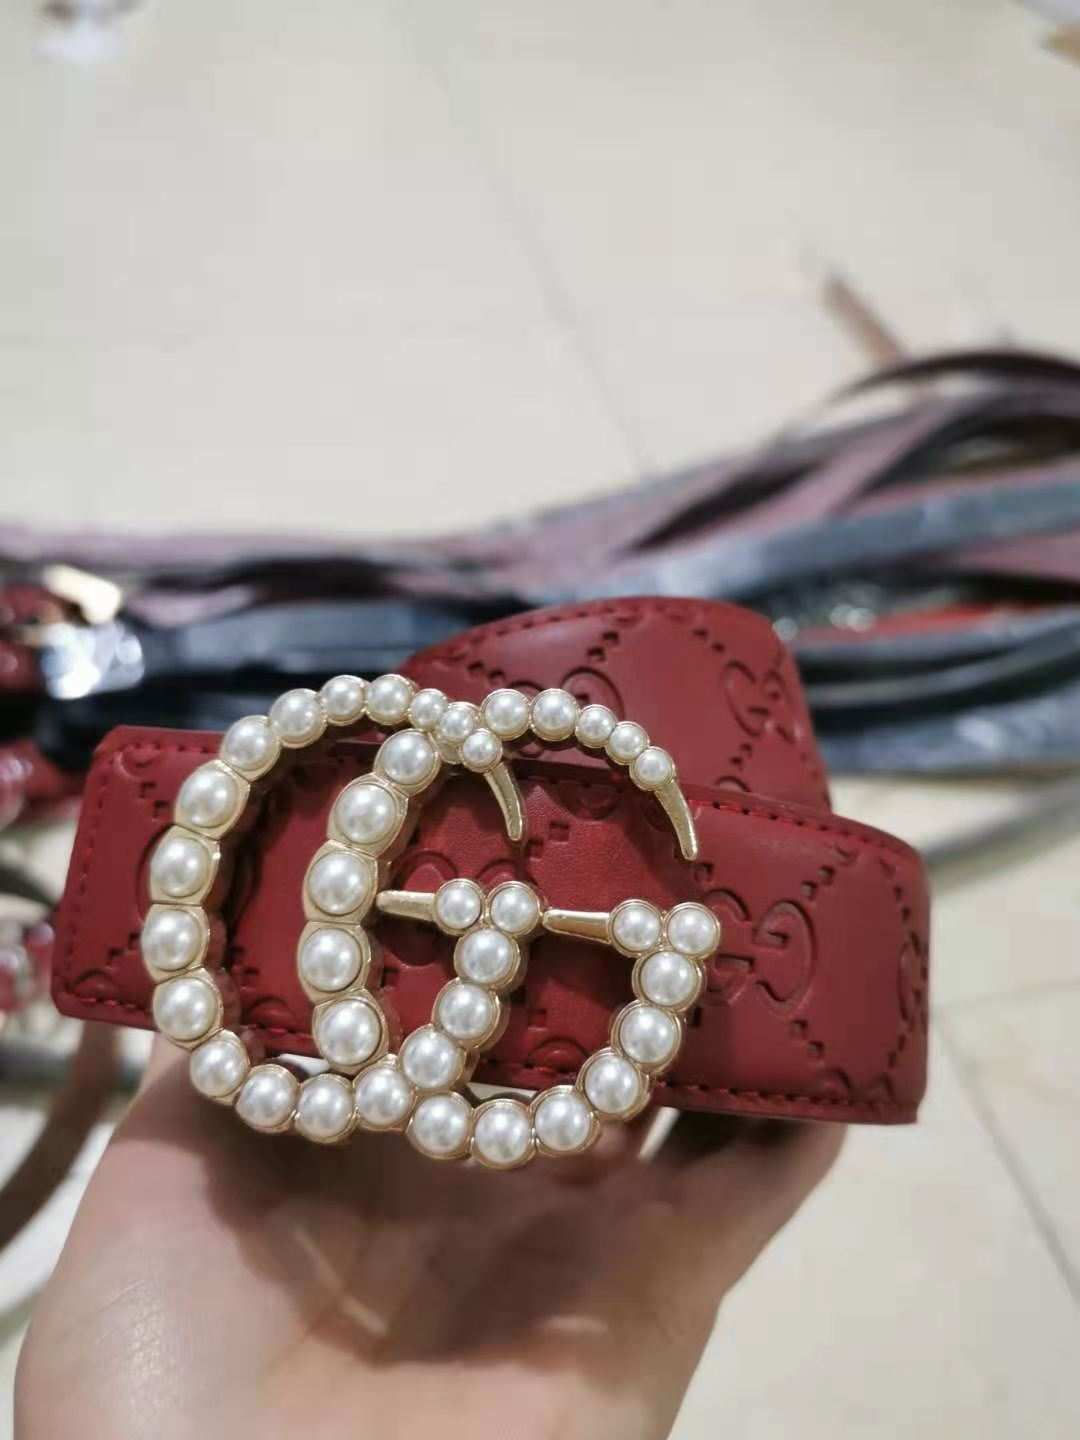 GG leather Belt with pearls.